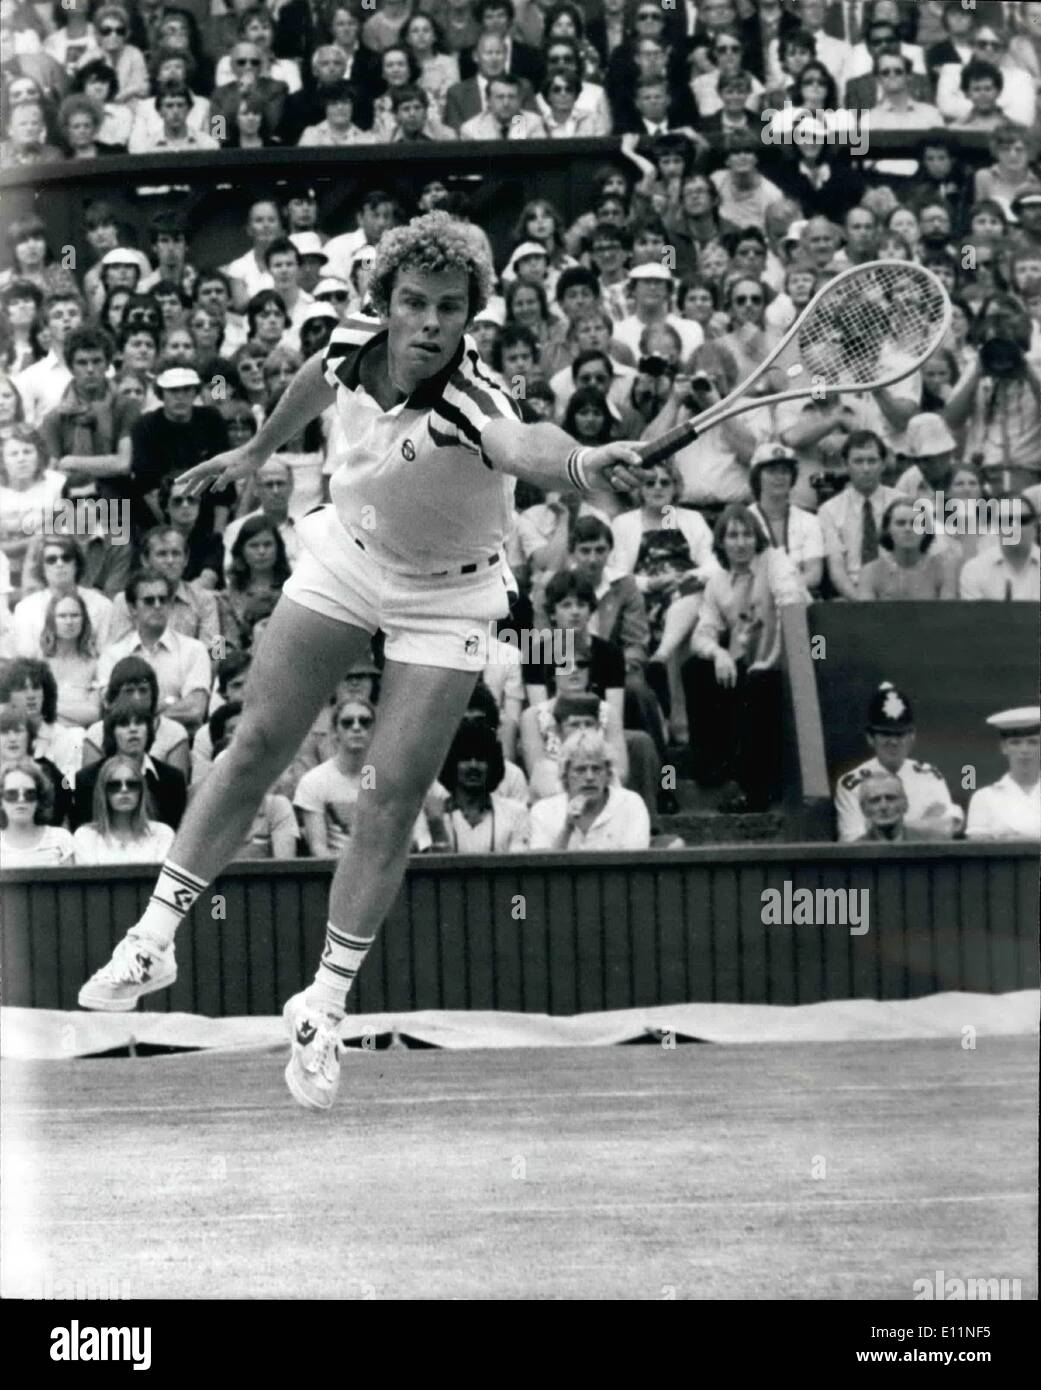 Jul. 07, 1979 - BJORN BORG WINS WIMBLEDON FOR THE FOURTH TIME IN A ROW Today on the Centre Court at Wimbledon, Bjorn Borg of Swedon, won the Men's Singles title for the fourth successive time when beating the American Roscos Tanner in five sets. PHOTO SHOWS: ROSCOE TANNER seen in action against Bjorn Borg on the centre court at Wimbledon today Stock Photo